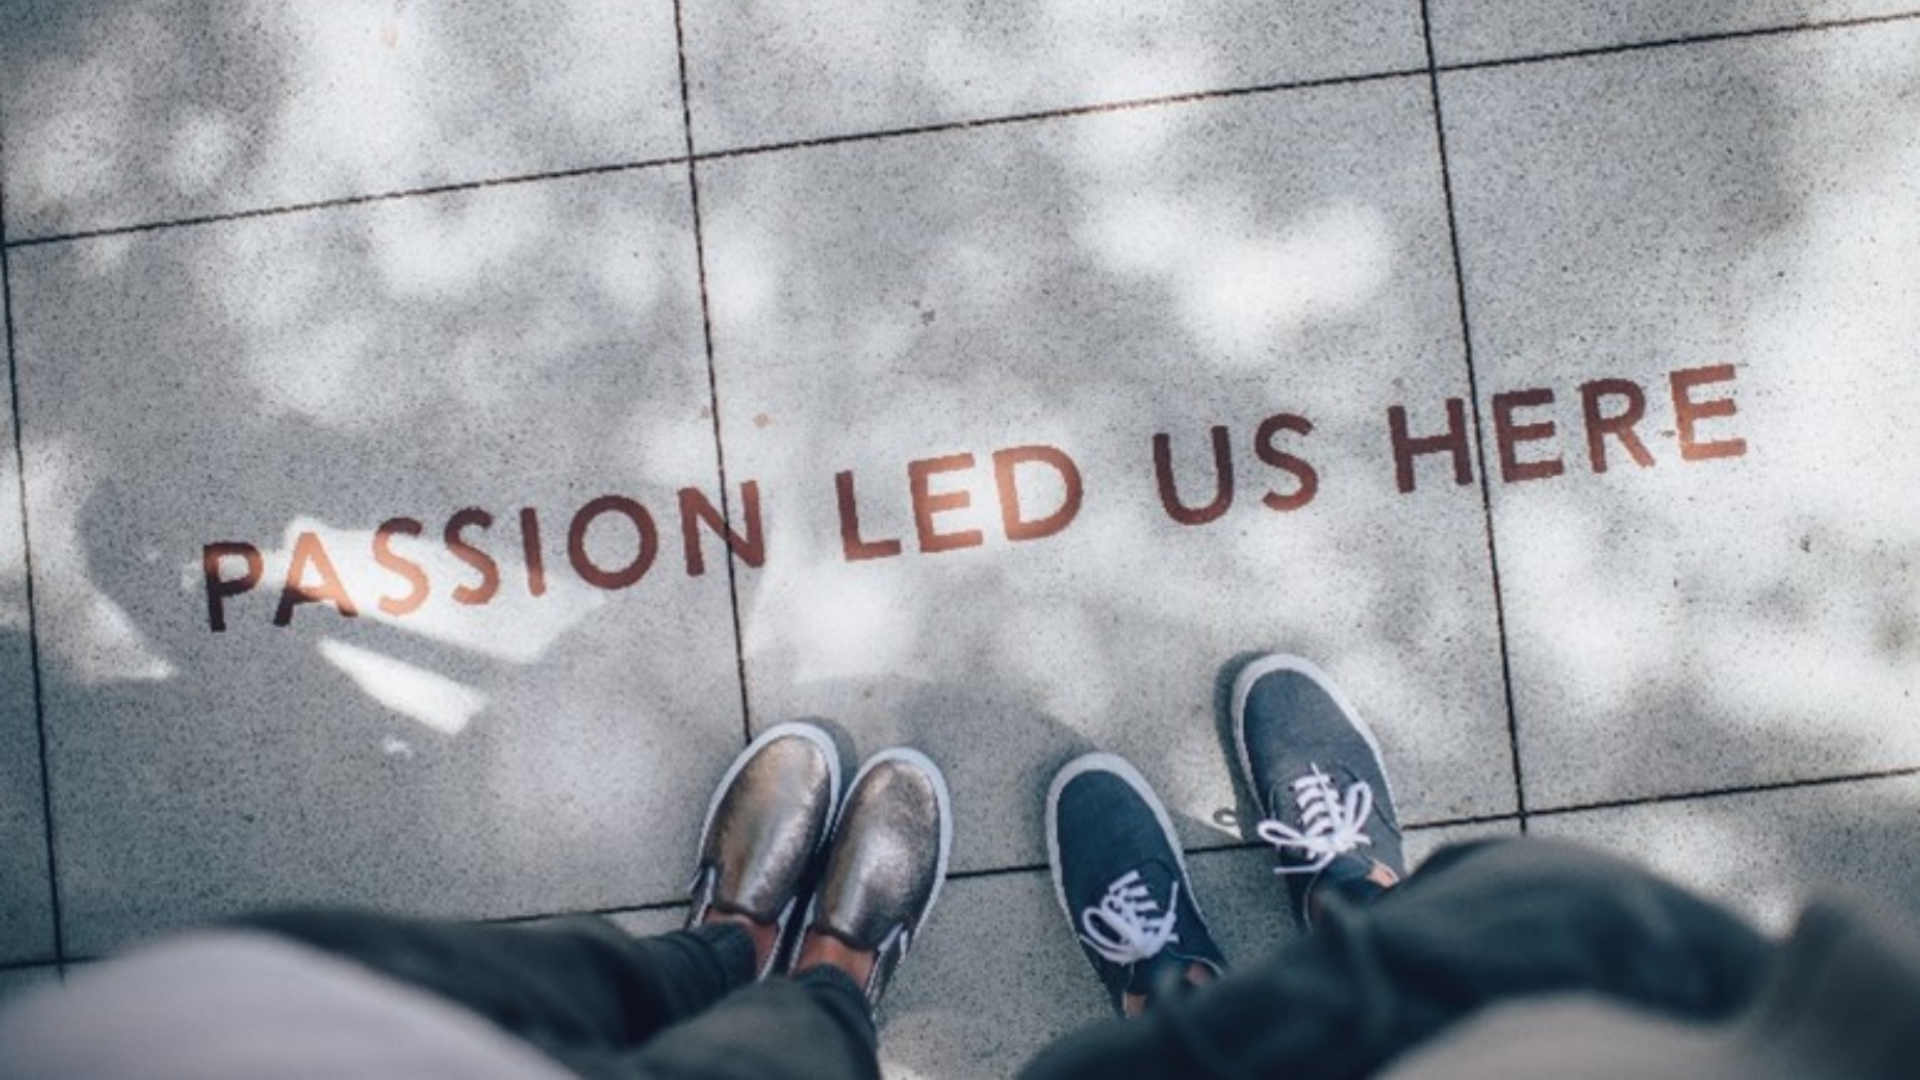 "passion led us here" is written on the ground